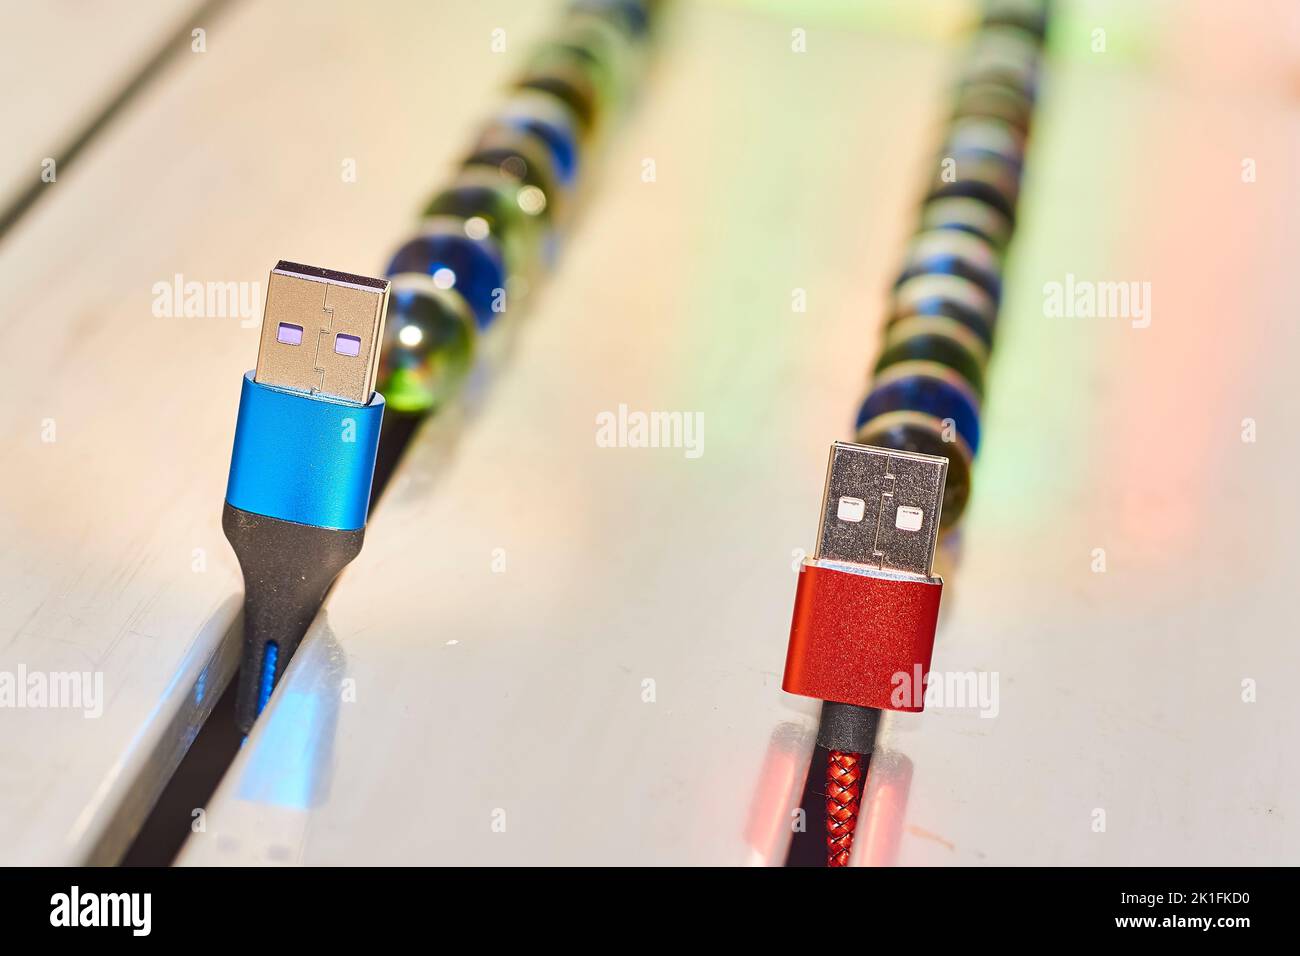 Connect and chat. Blue and red usb cables and colored balloons Stock Photo